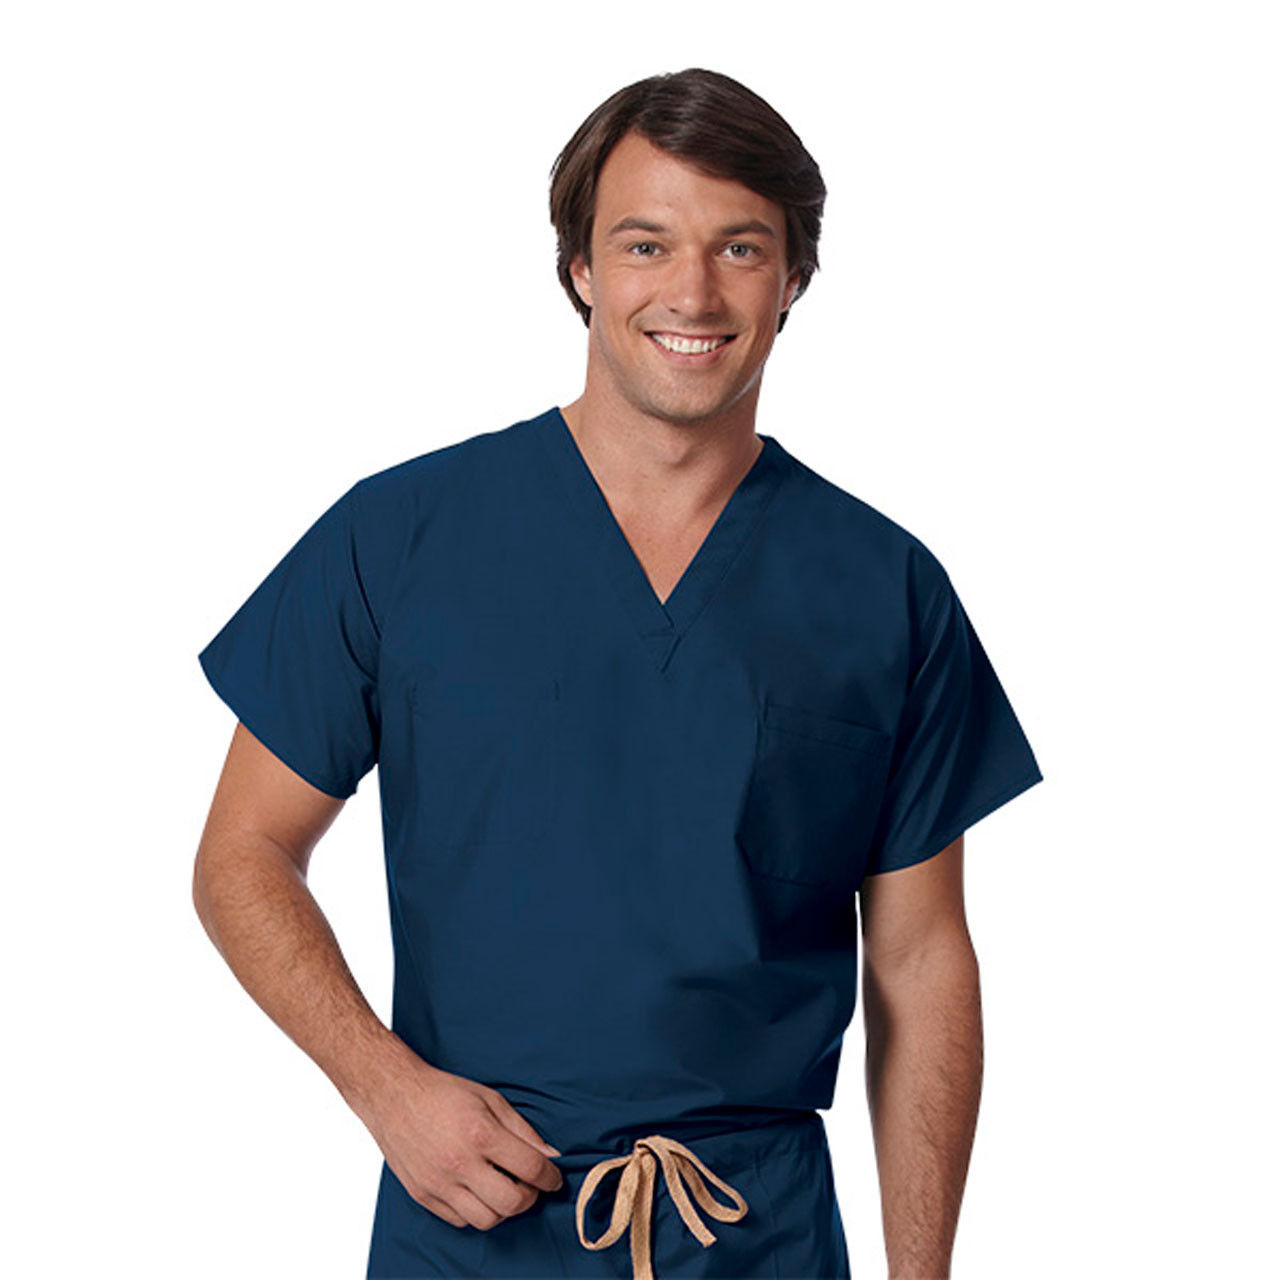 Can I use navy surgical scrubs in all hospital areas?